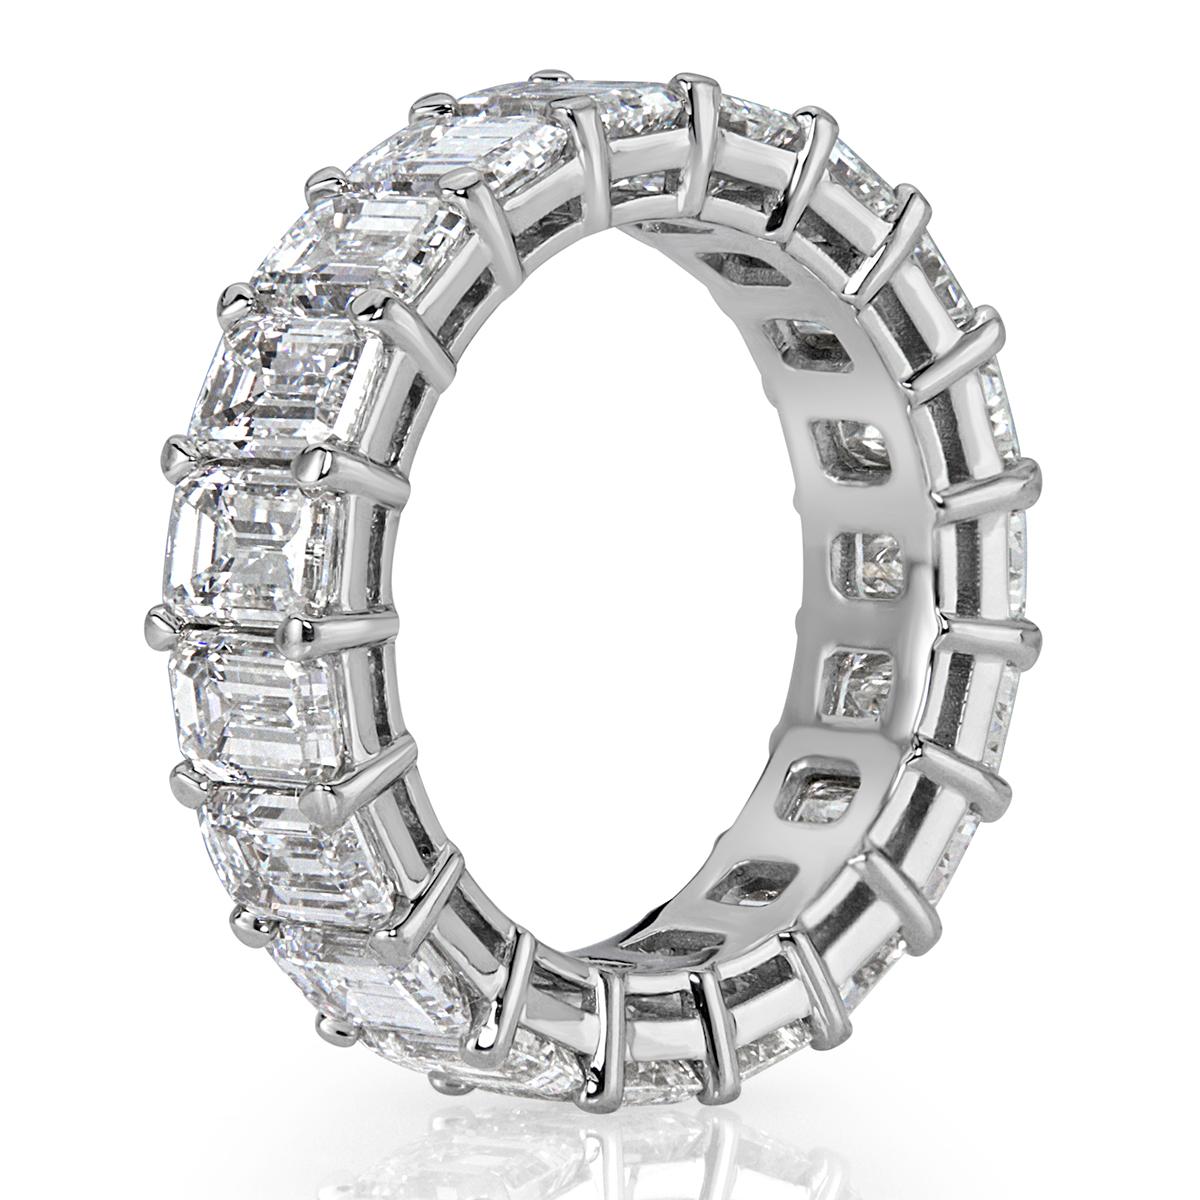 This divine diamond eternity ring showcases 7.82ct of emerald cut diamonds graded at E-F, VVS2-VS1. All eternity bands are shown in a size 6.5. We custom craft each eternity band and will create the same design for you in your desired ring size.